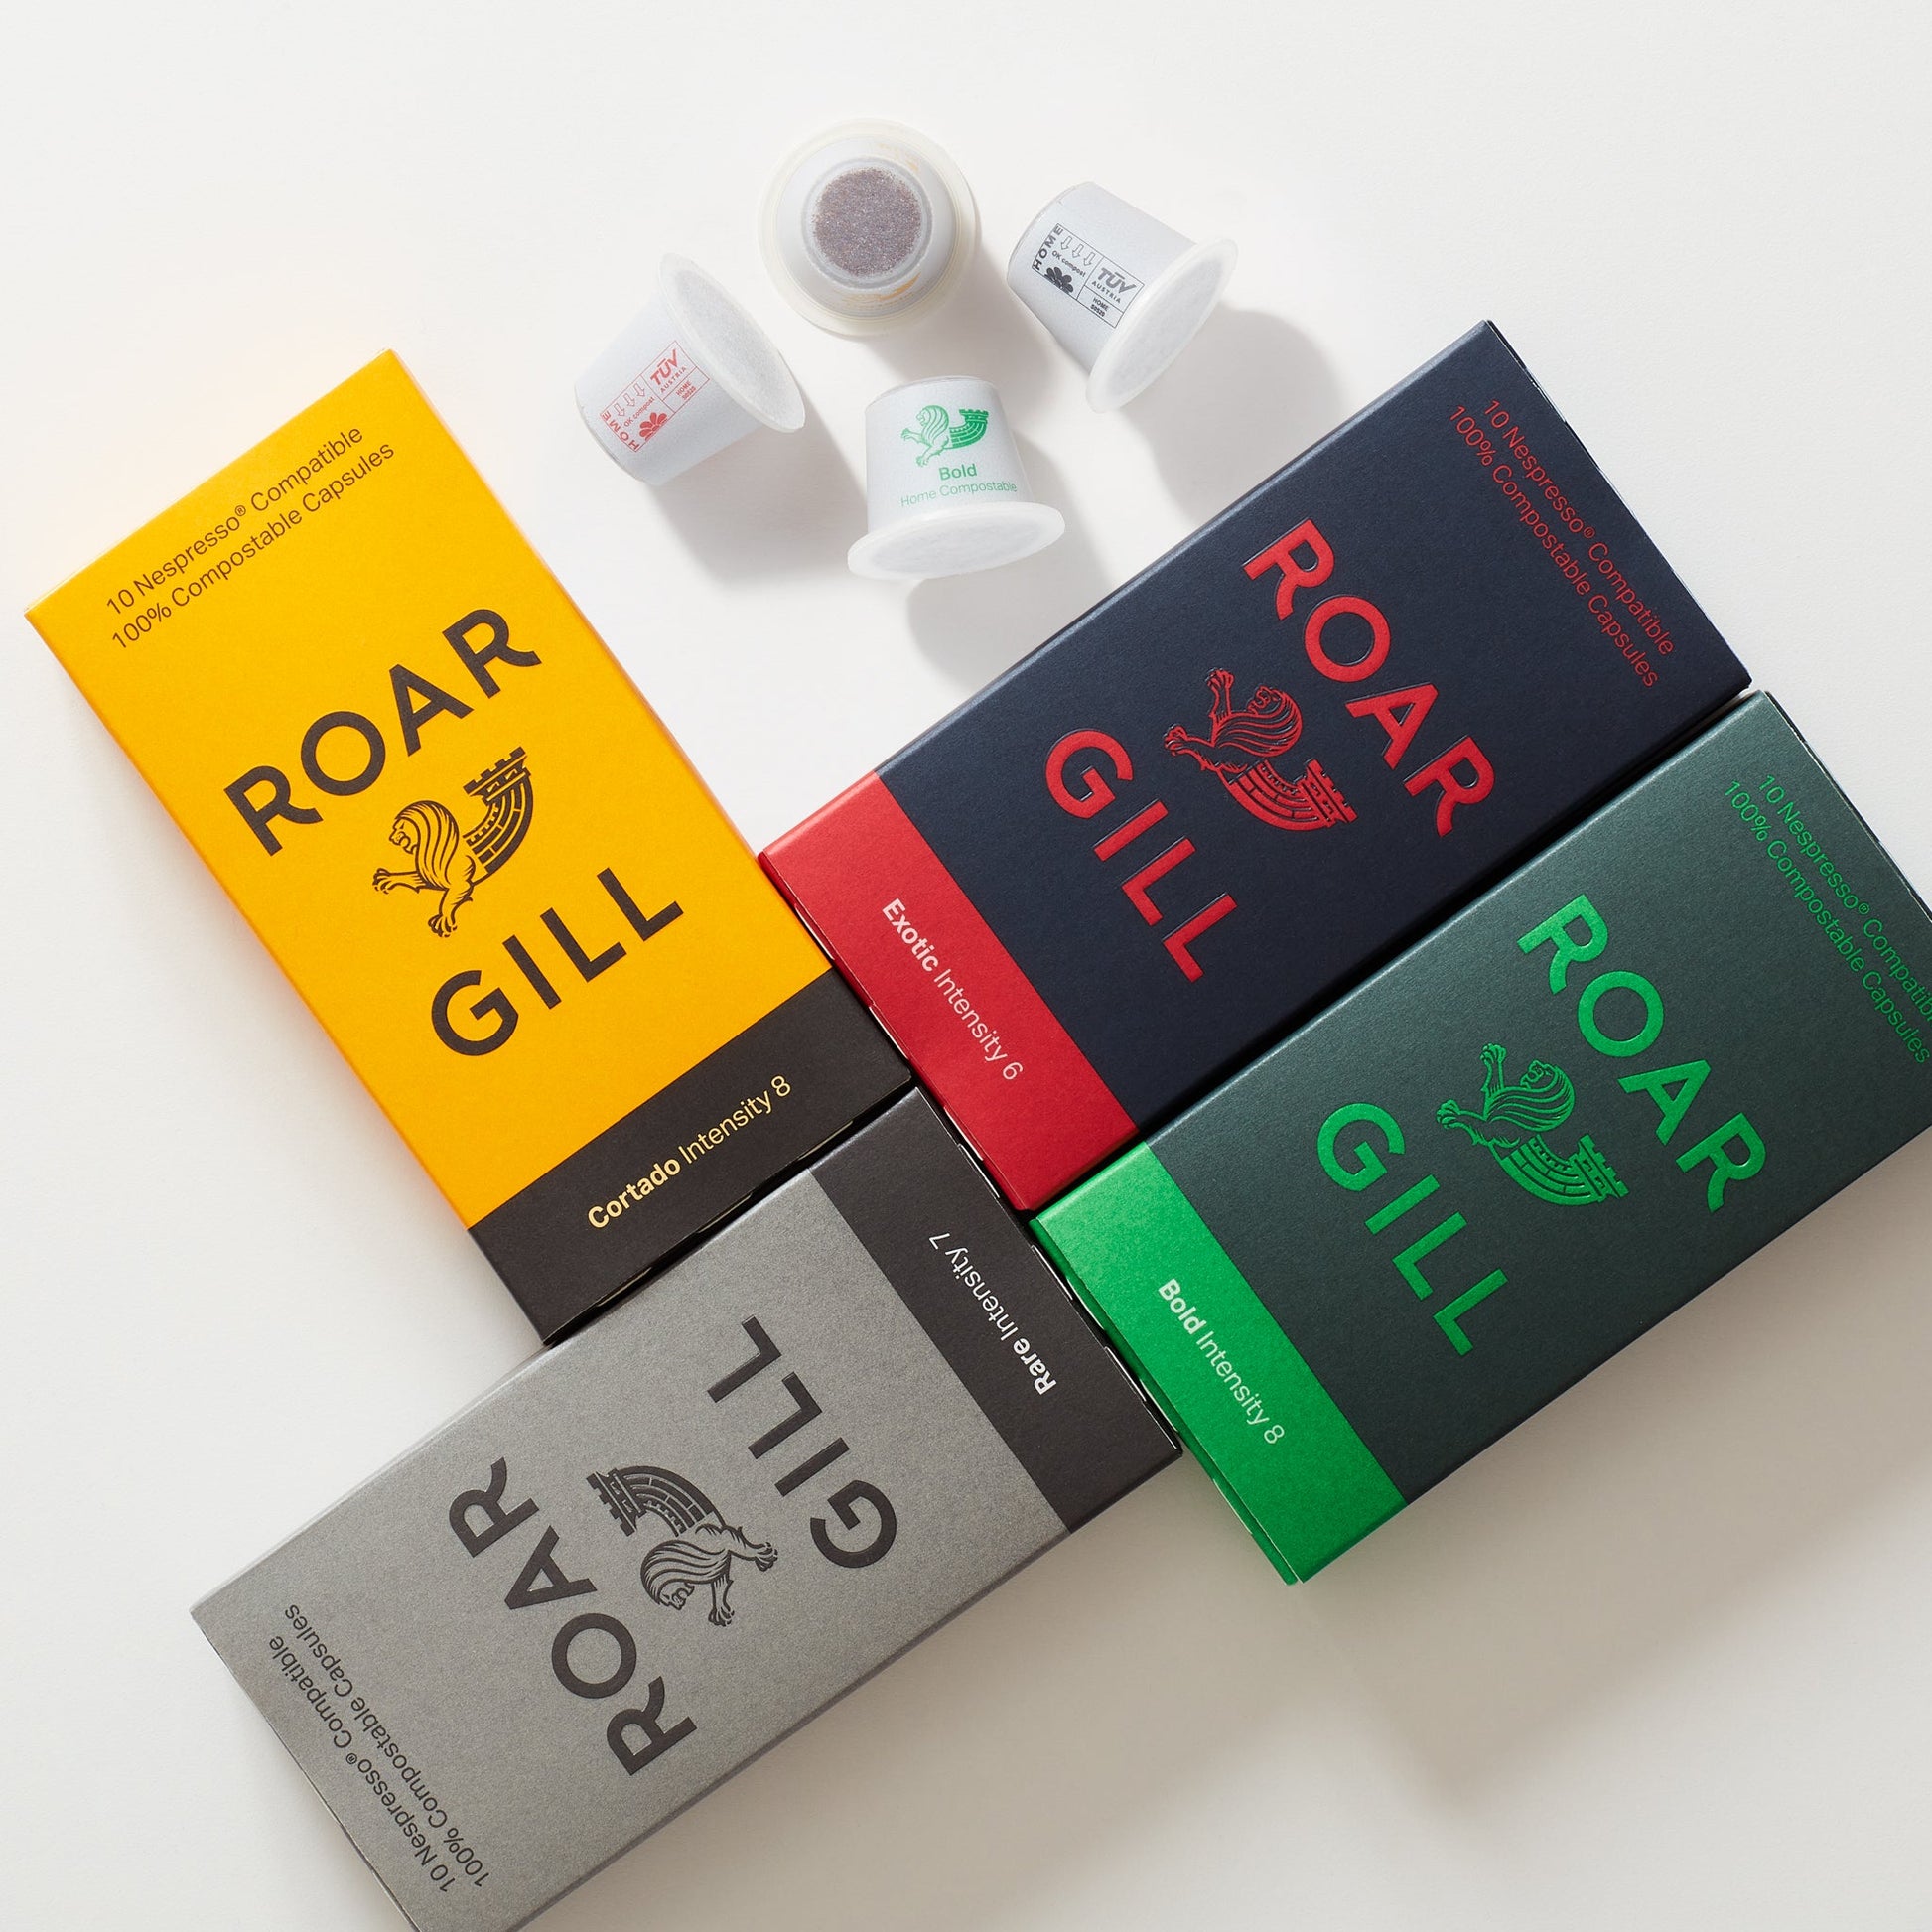 Roar Gill 40 Pod Variety Pack. Includes Bold, Exotic, Rare & Cortado in 4 separate boxes.